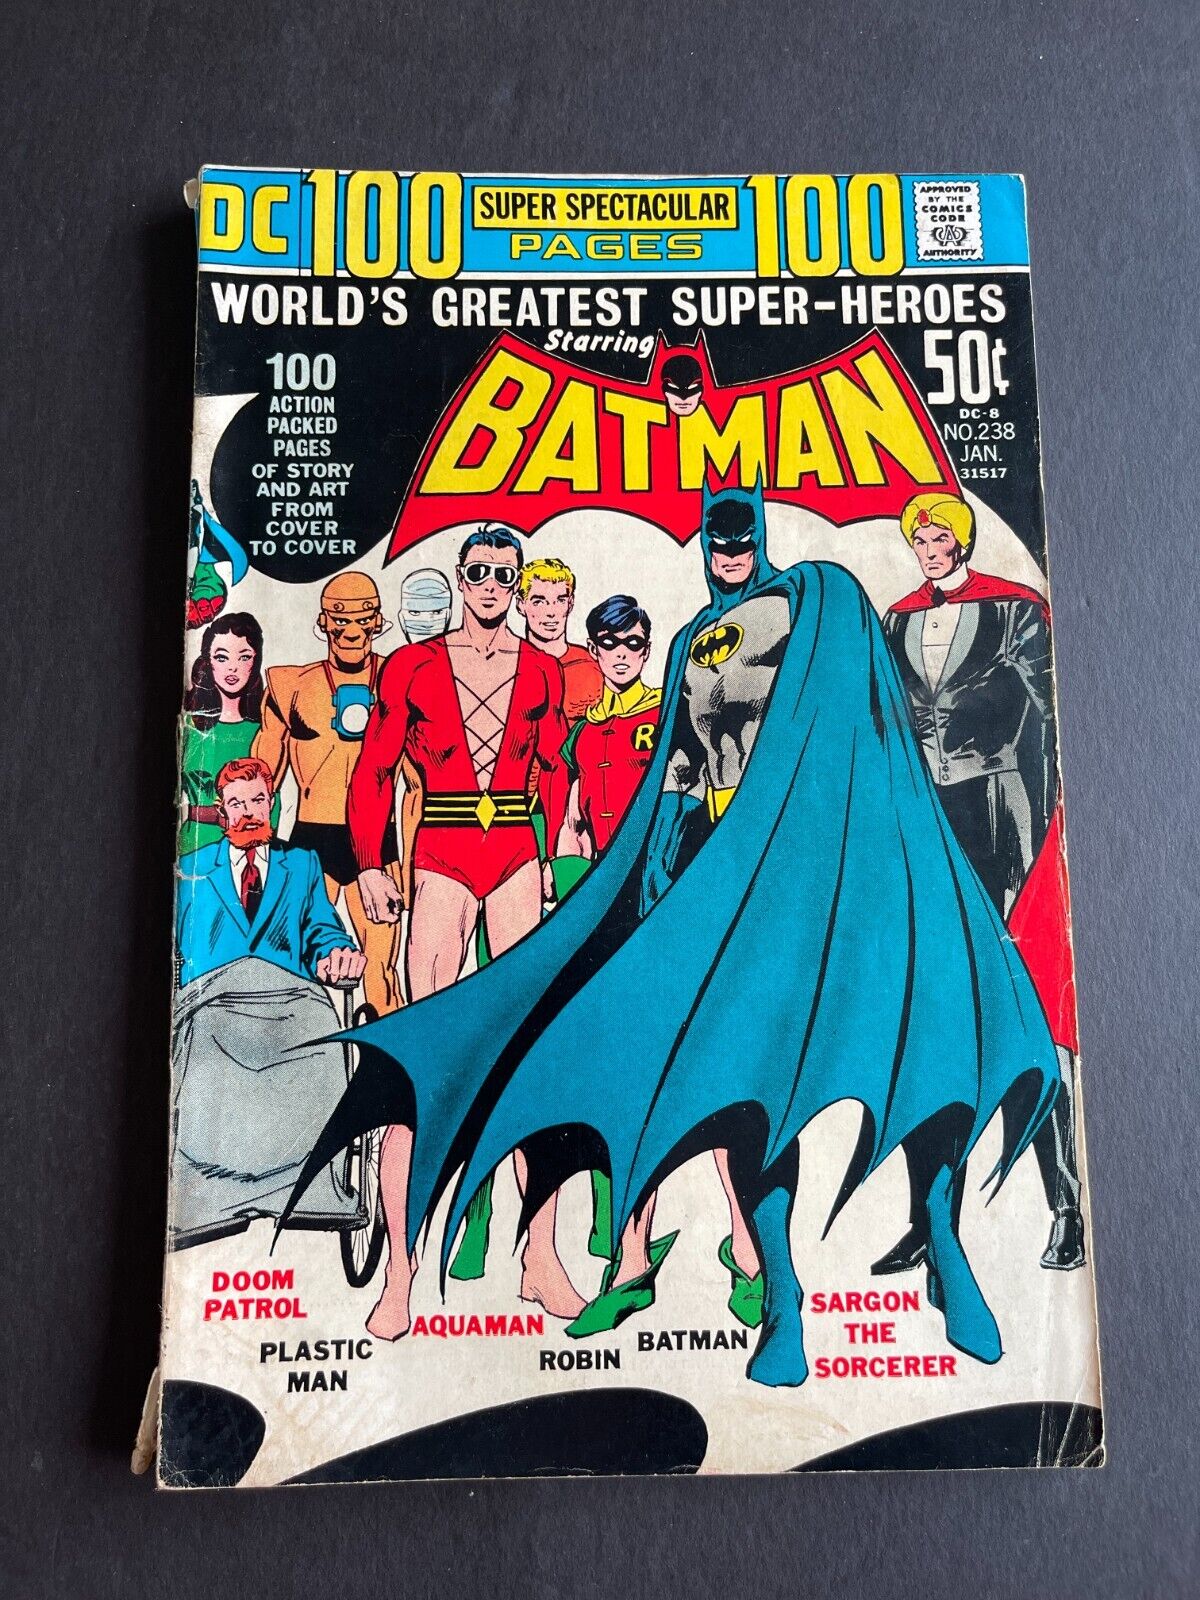 Batman #238 - Cover by Neal Adams, 100 Page Spectacular (DC, 1972) VG/F